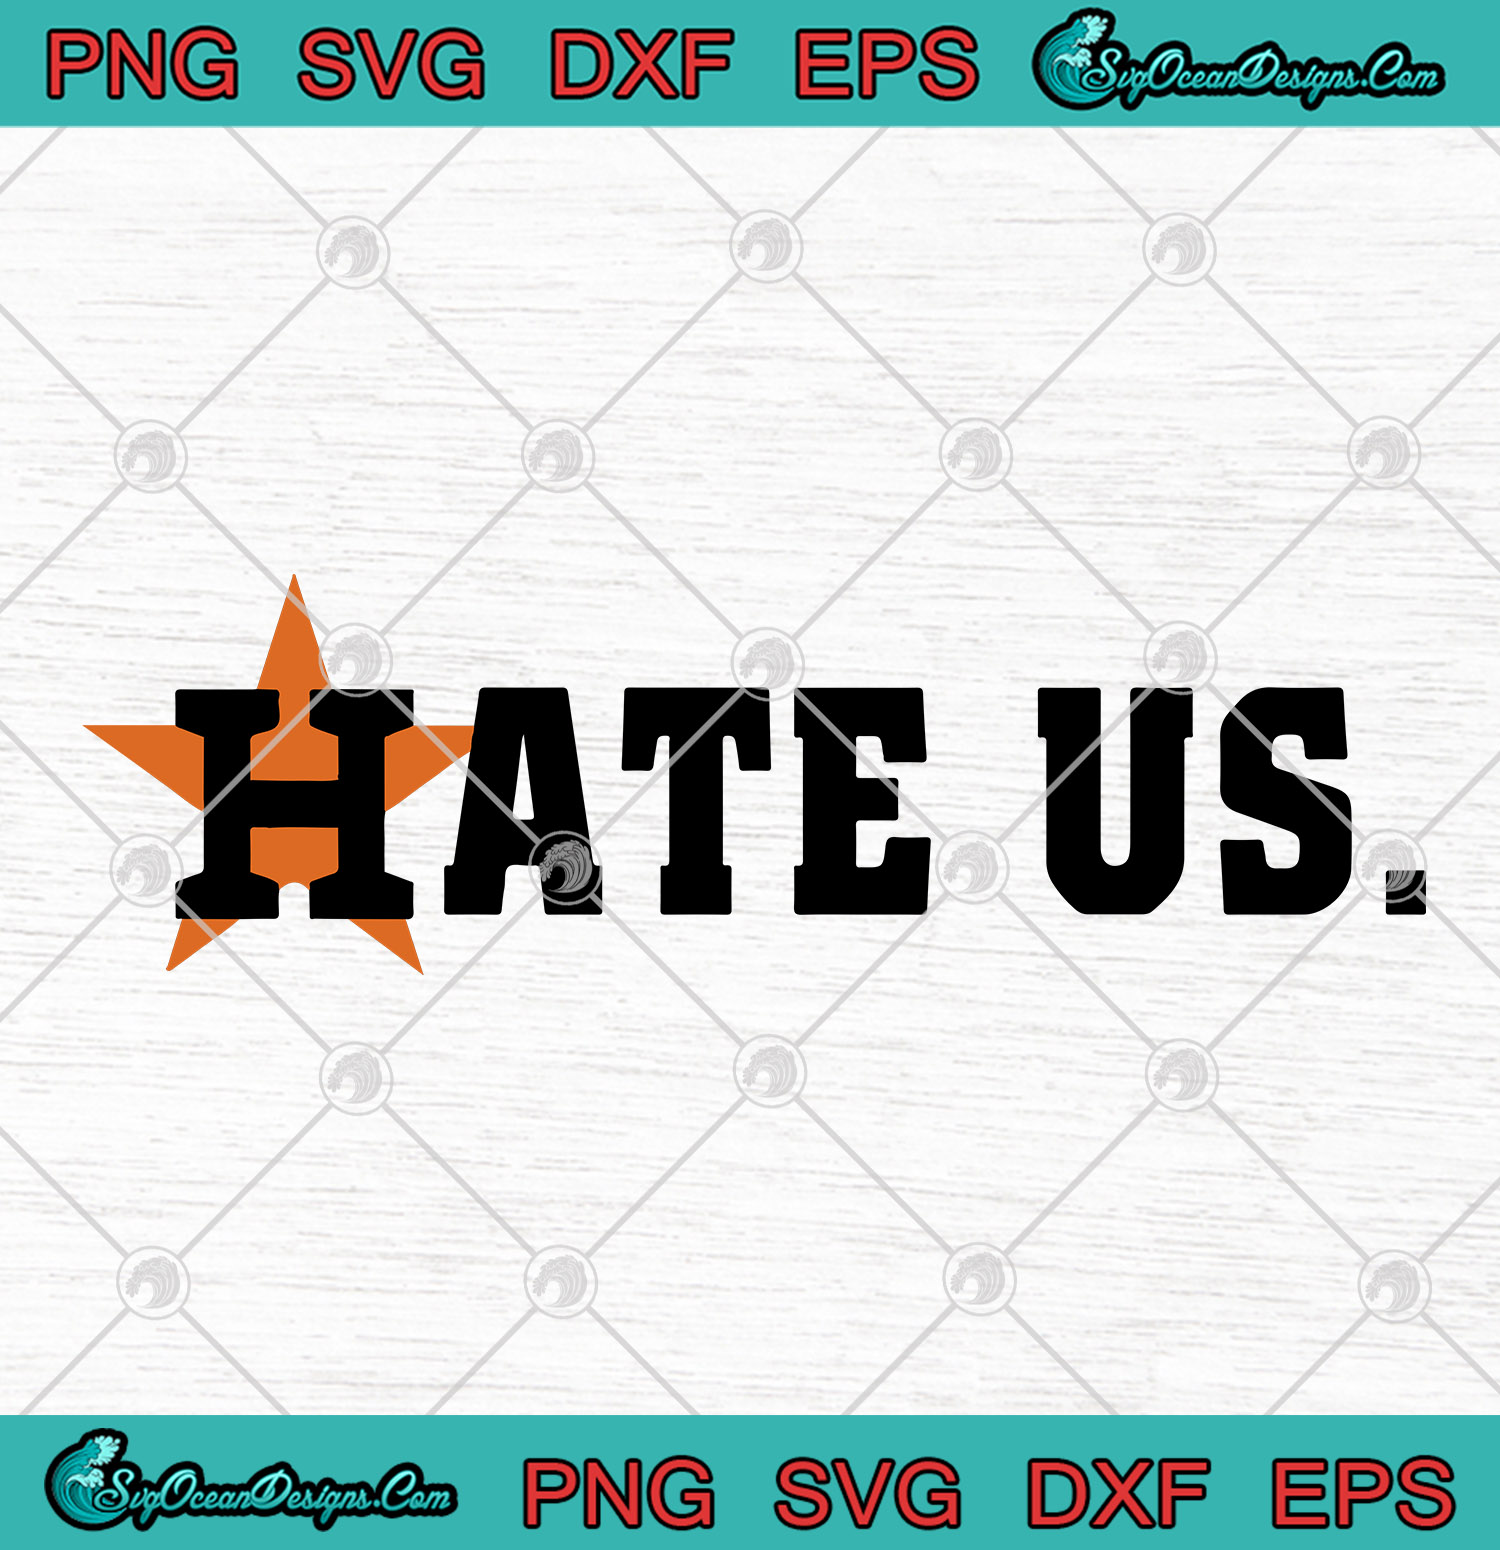 Houston Astros Fueled By Haters, Layered Svg Files - free svg files for  cricut